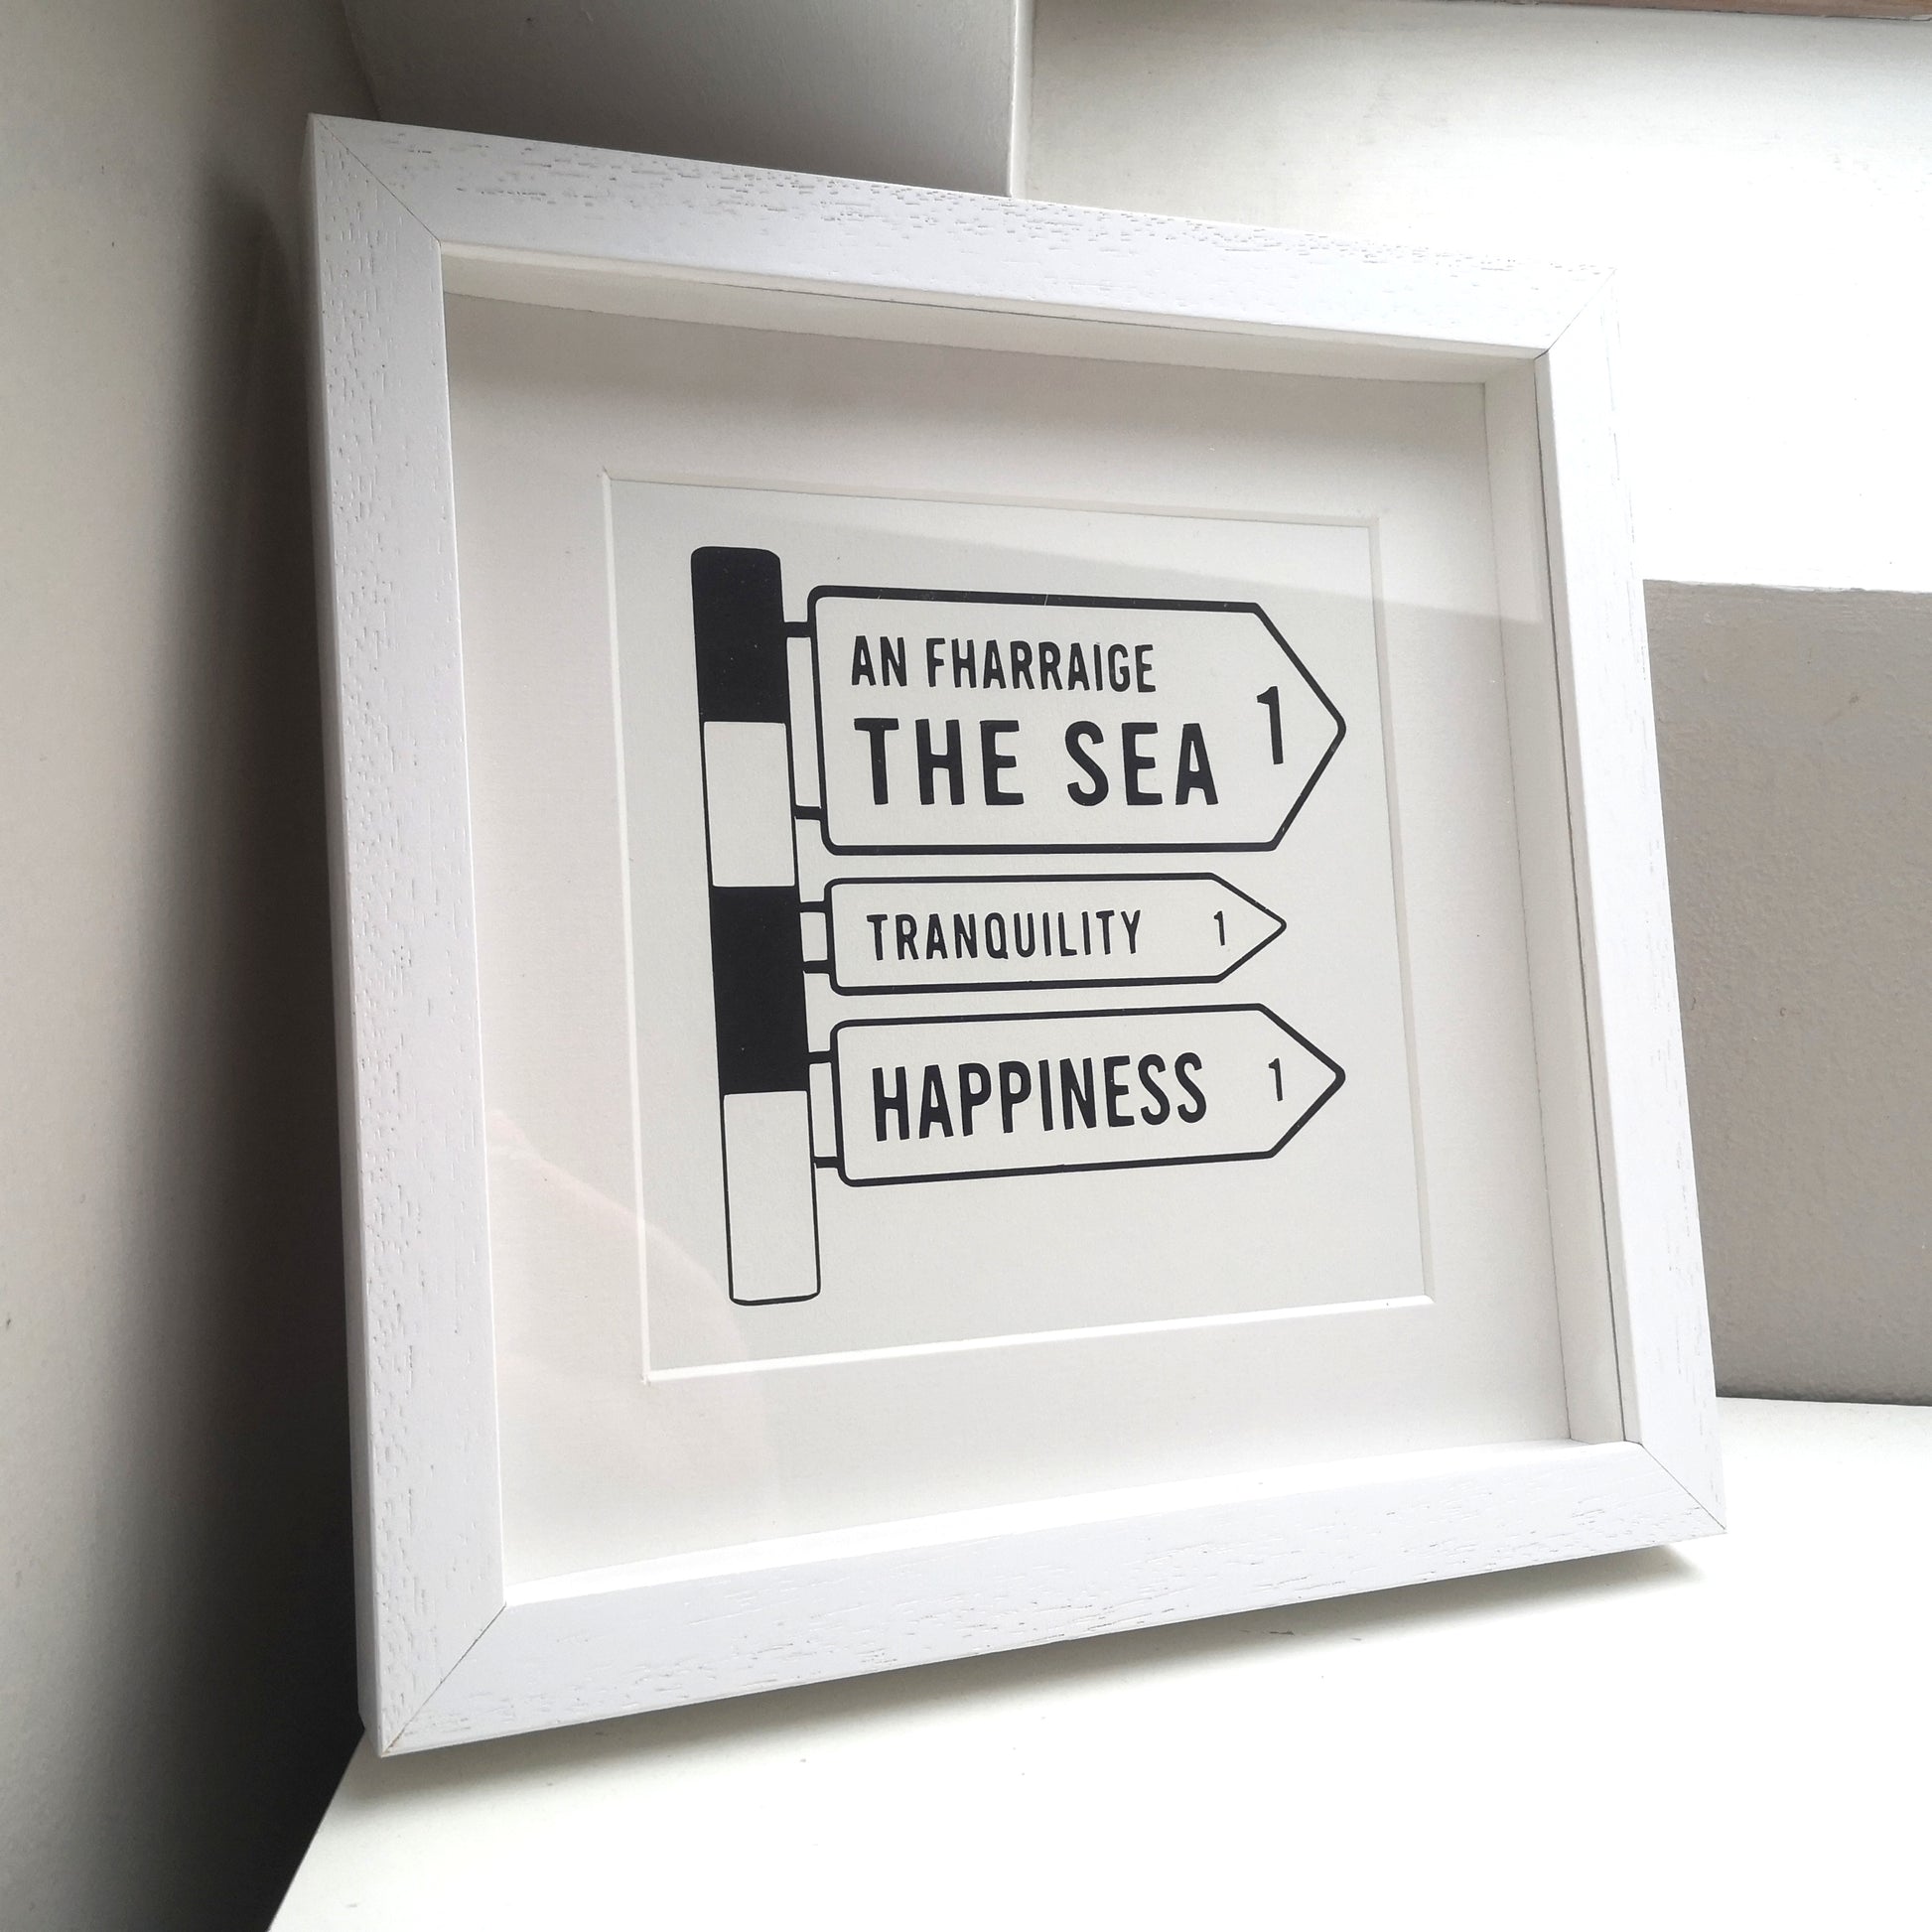 A 25x25cm deep box white wooden frame with a papercutting in it of an old Irish Roadsign pointing to the right with arrows for The Sea, Tranquility and Happiness